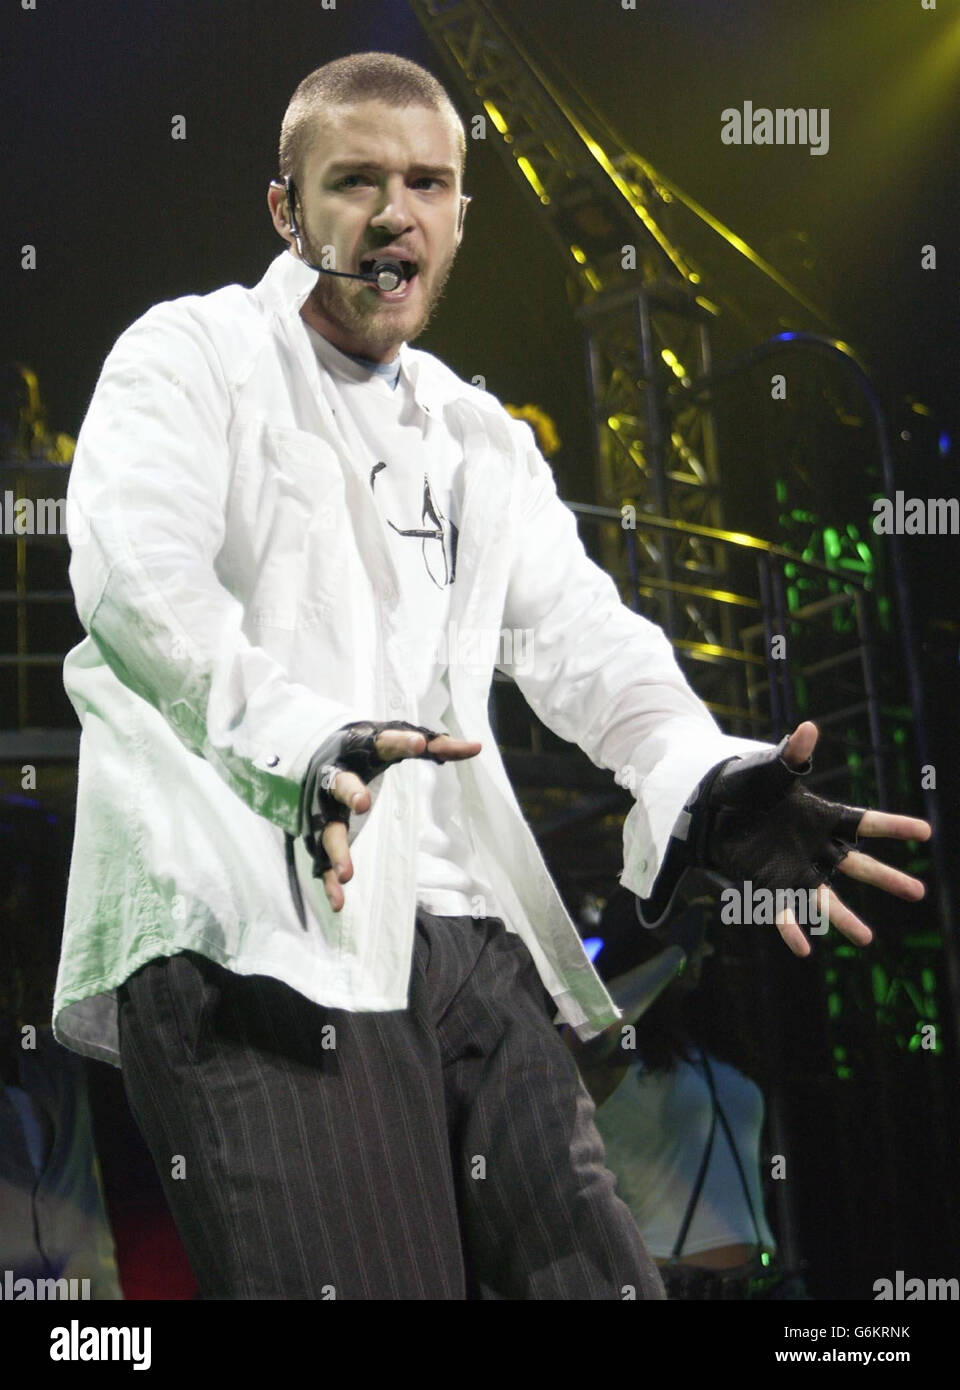 Justin Timberlake performs on stage at Earl's Court in London during his second stadium tour of the year. Stock Photo